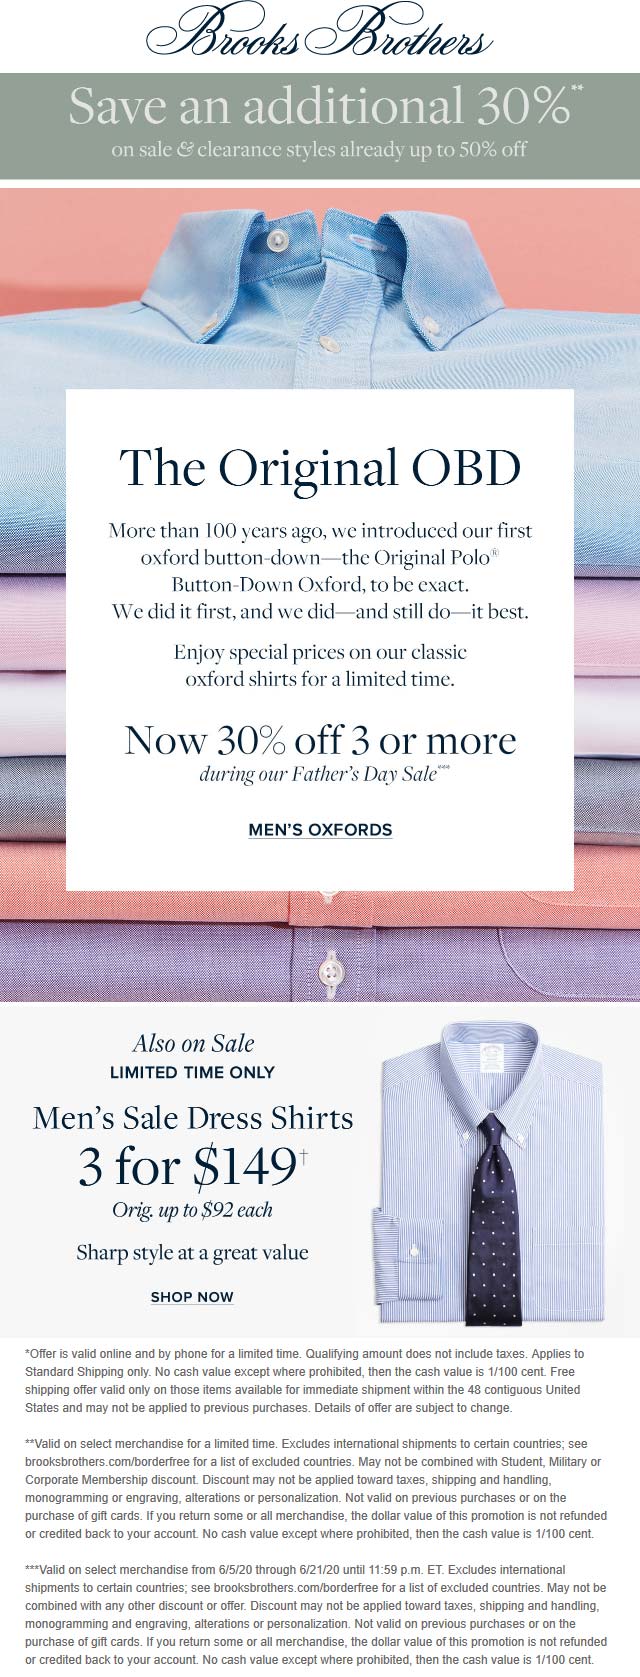 Brooks Brothers stores Coupon  Extra 30% off & more at Brooks Brothers #brooksbrothers